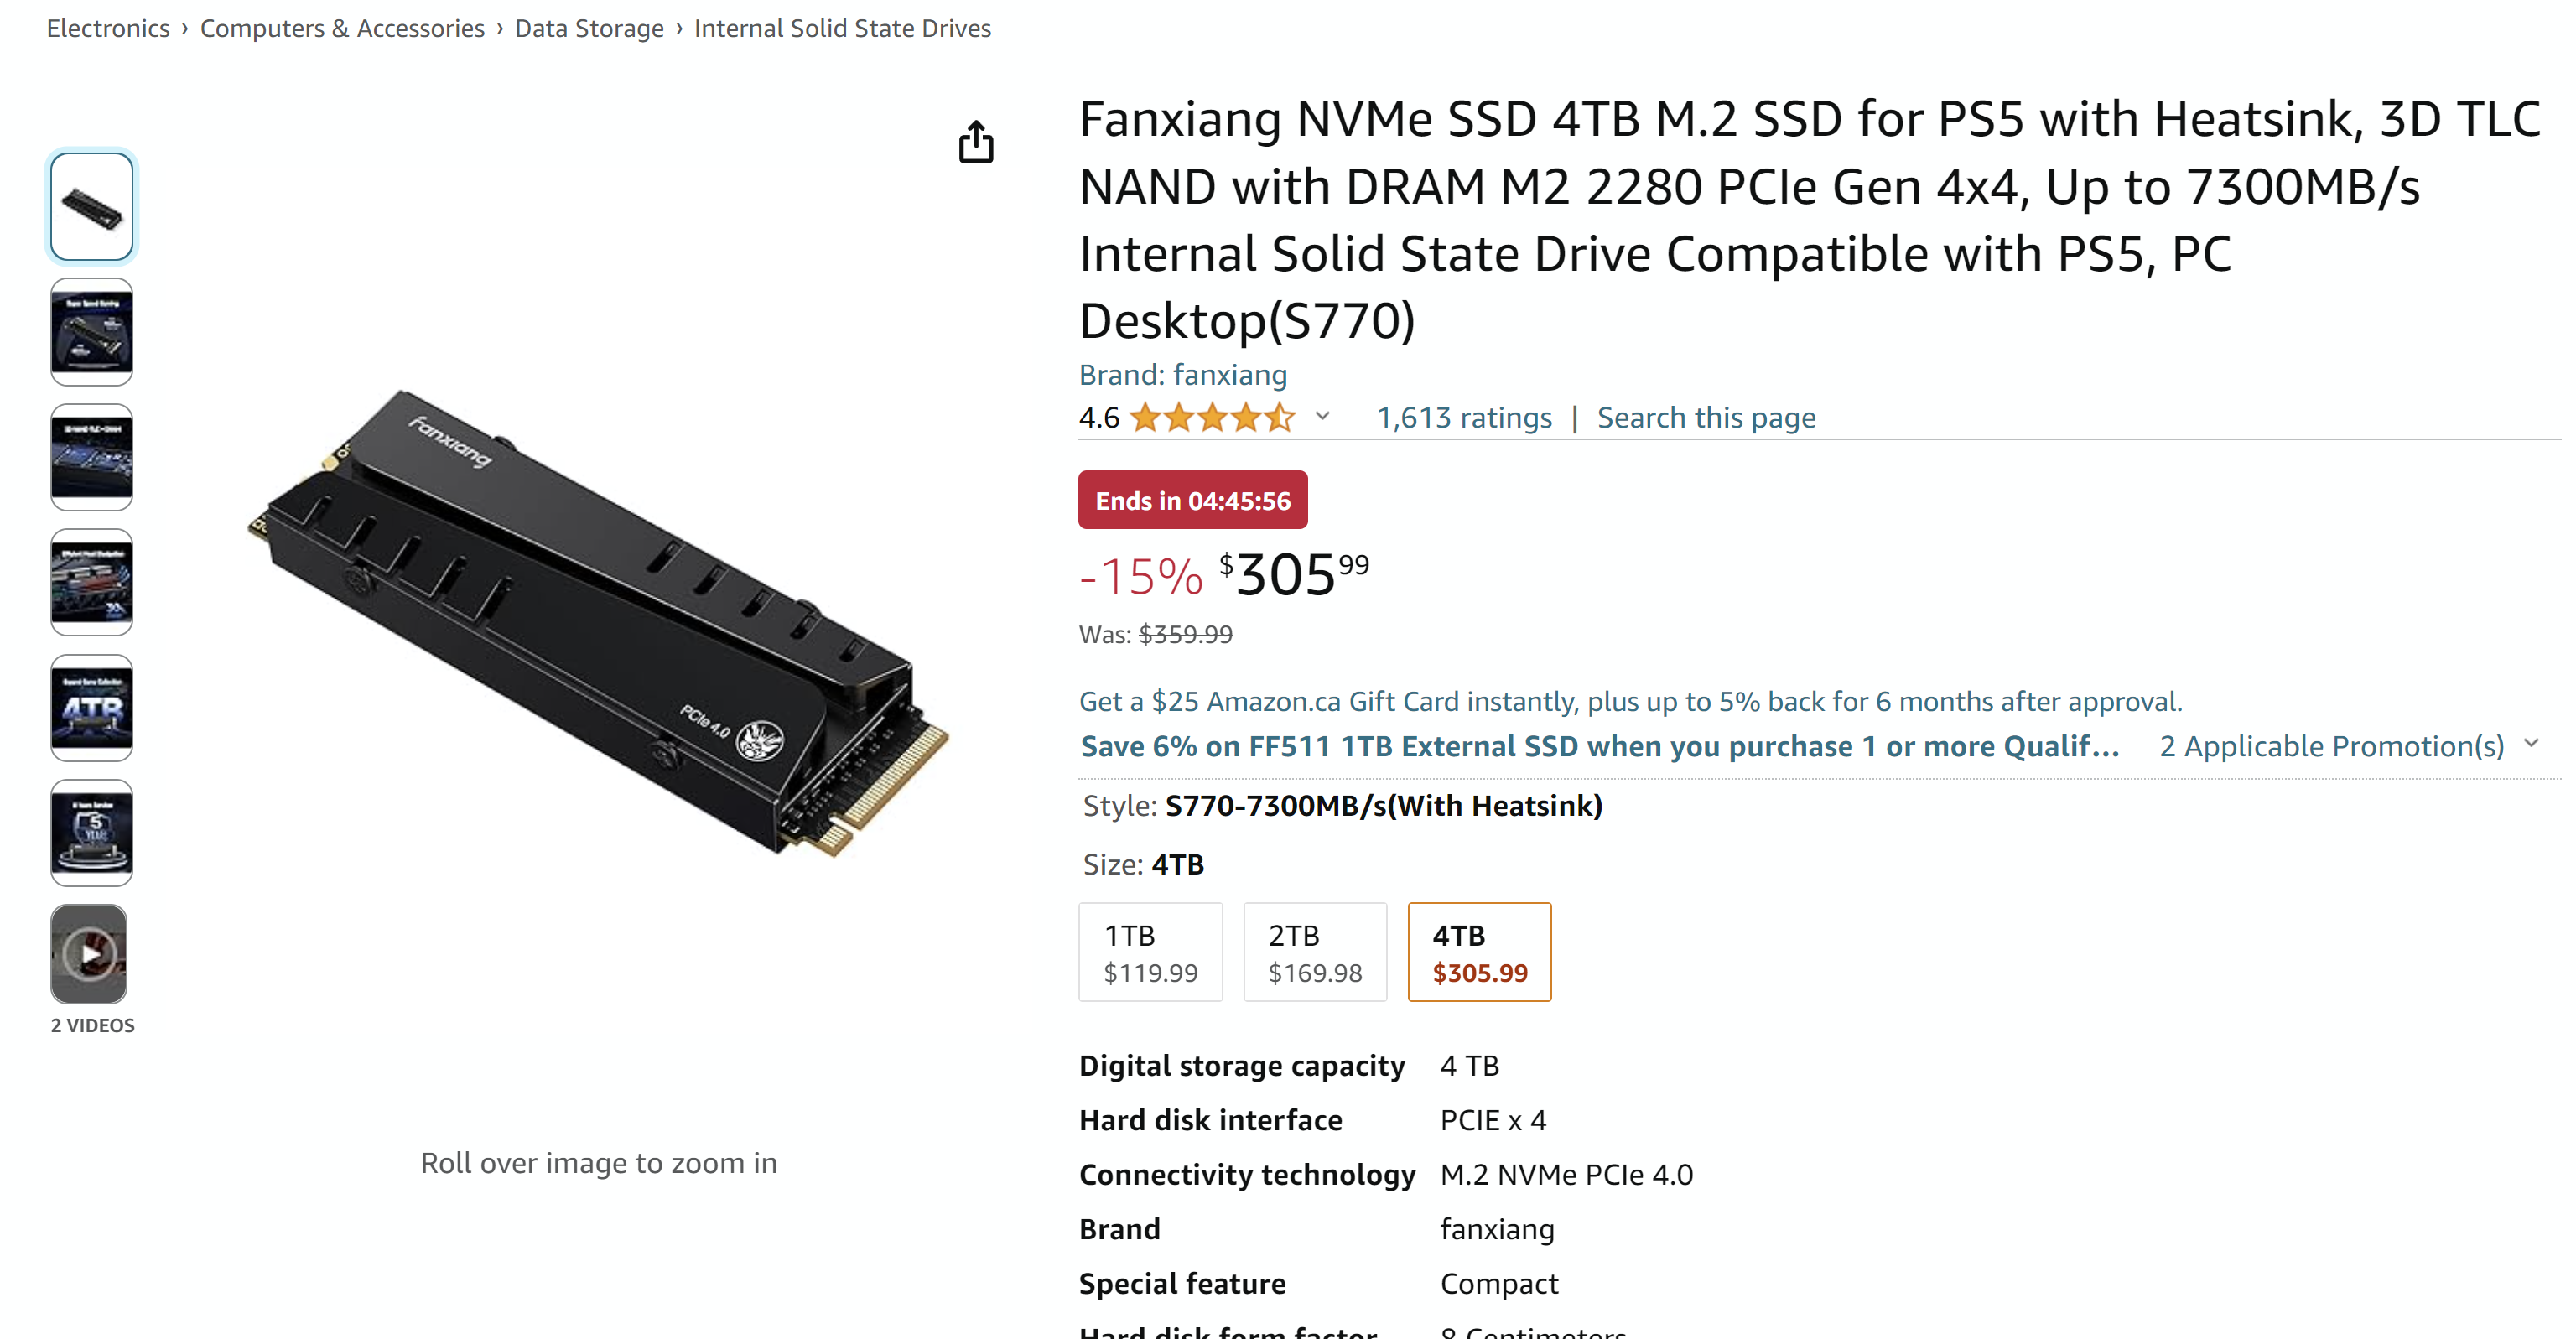 Fanxiang NVMe SSD 4TB M.2 SSD for PS5 with Heatsink, 3D TLC NAND with DRAM M2 2280 PCIe Gen 4x4